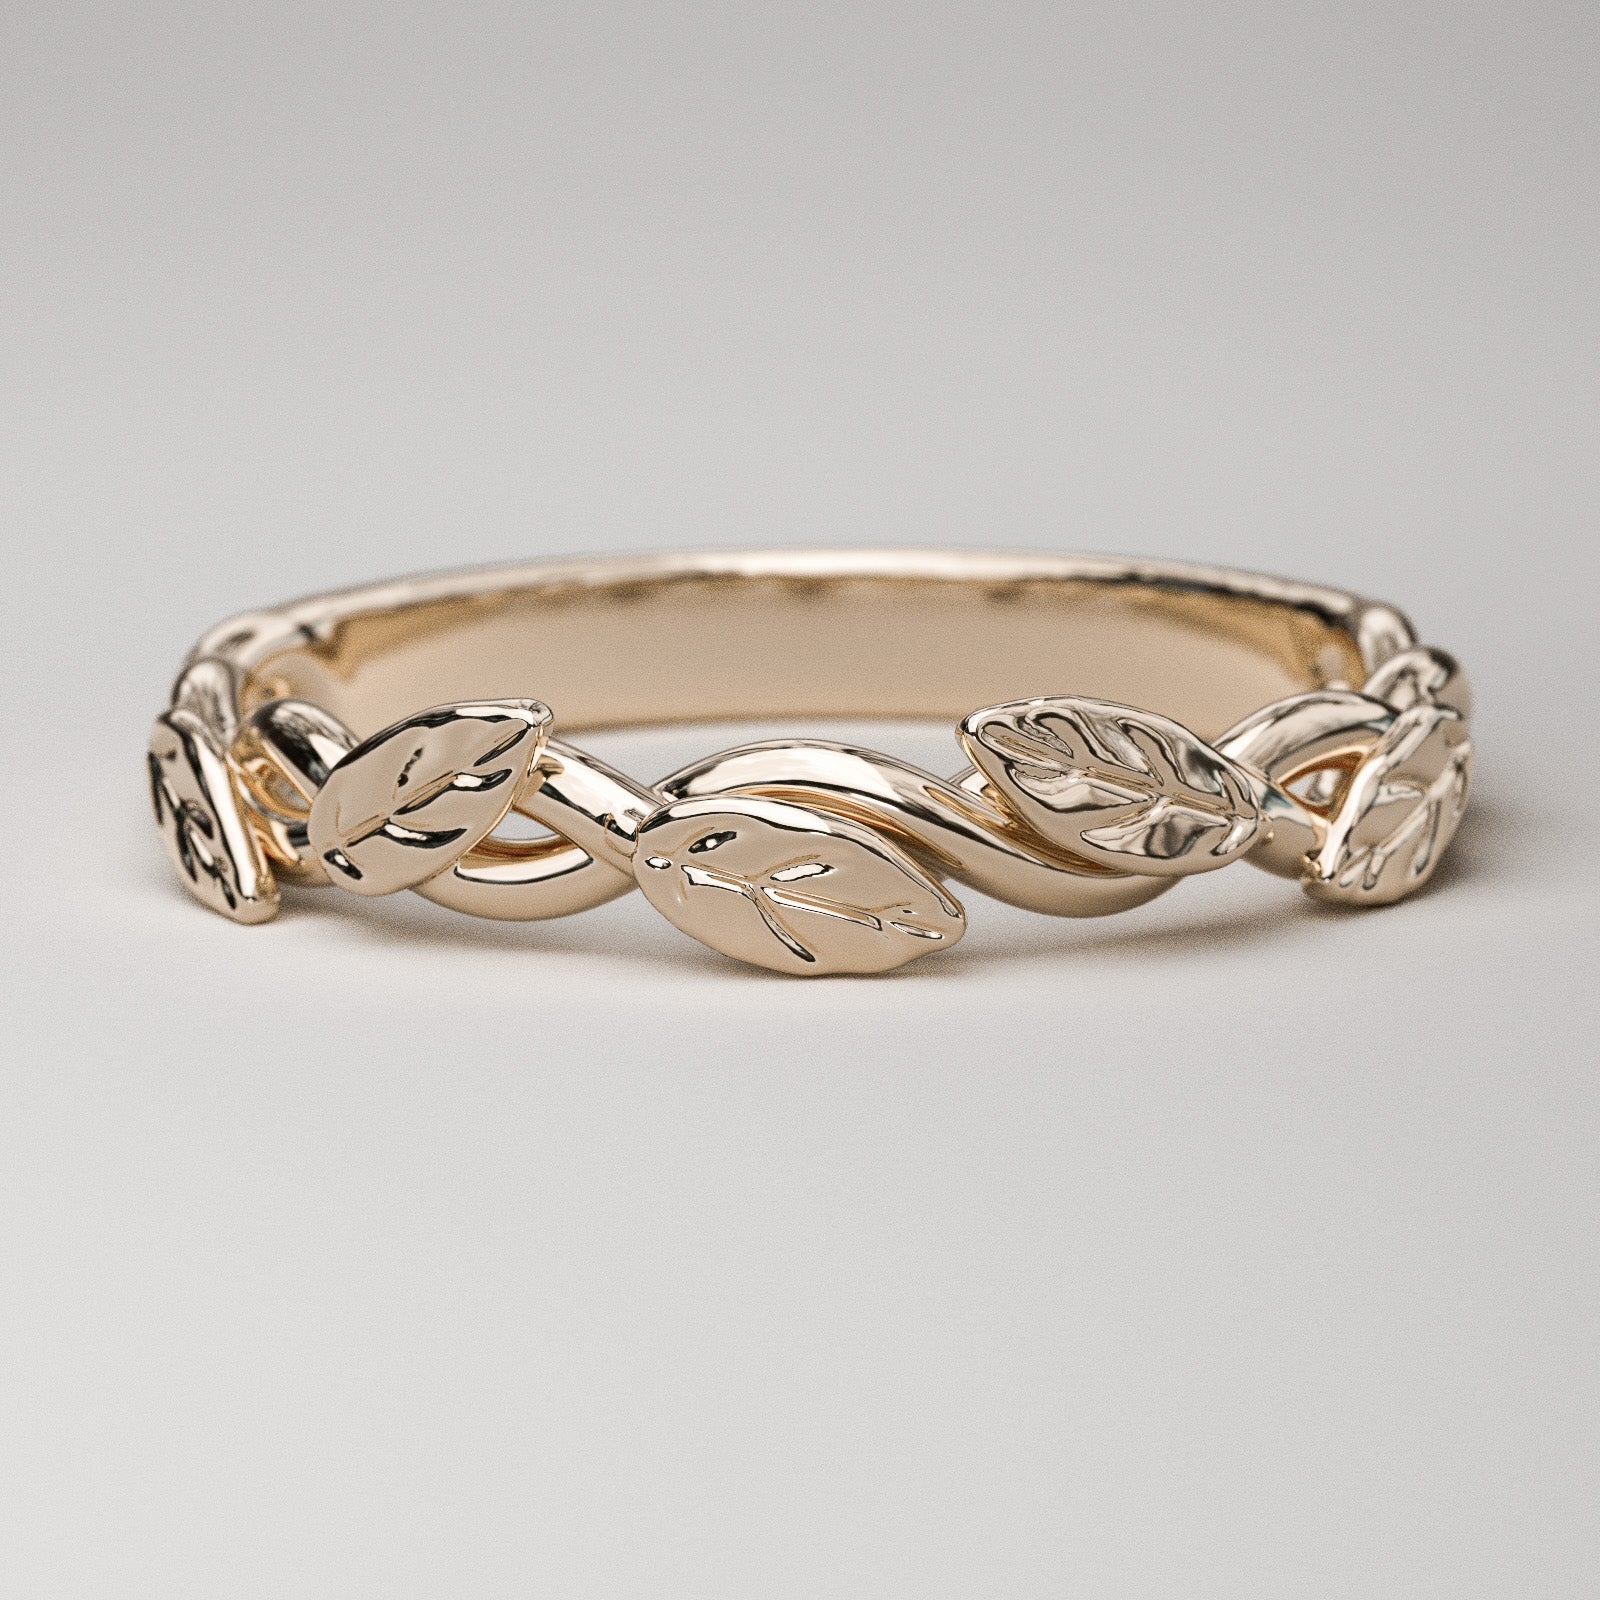 intertwined vine ring with leaves in rose gold